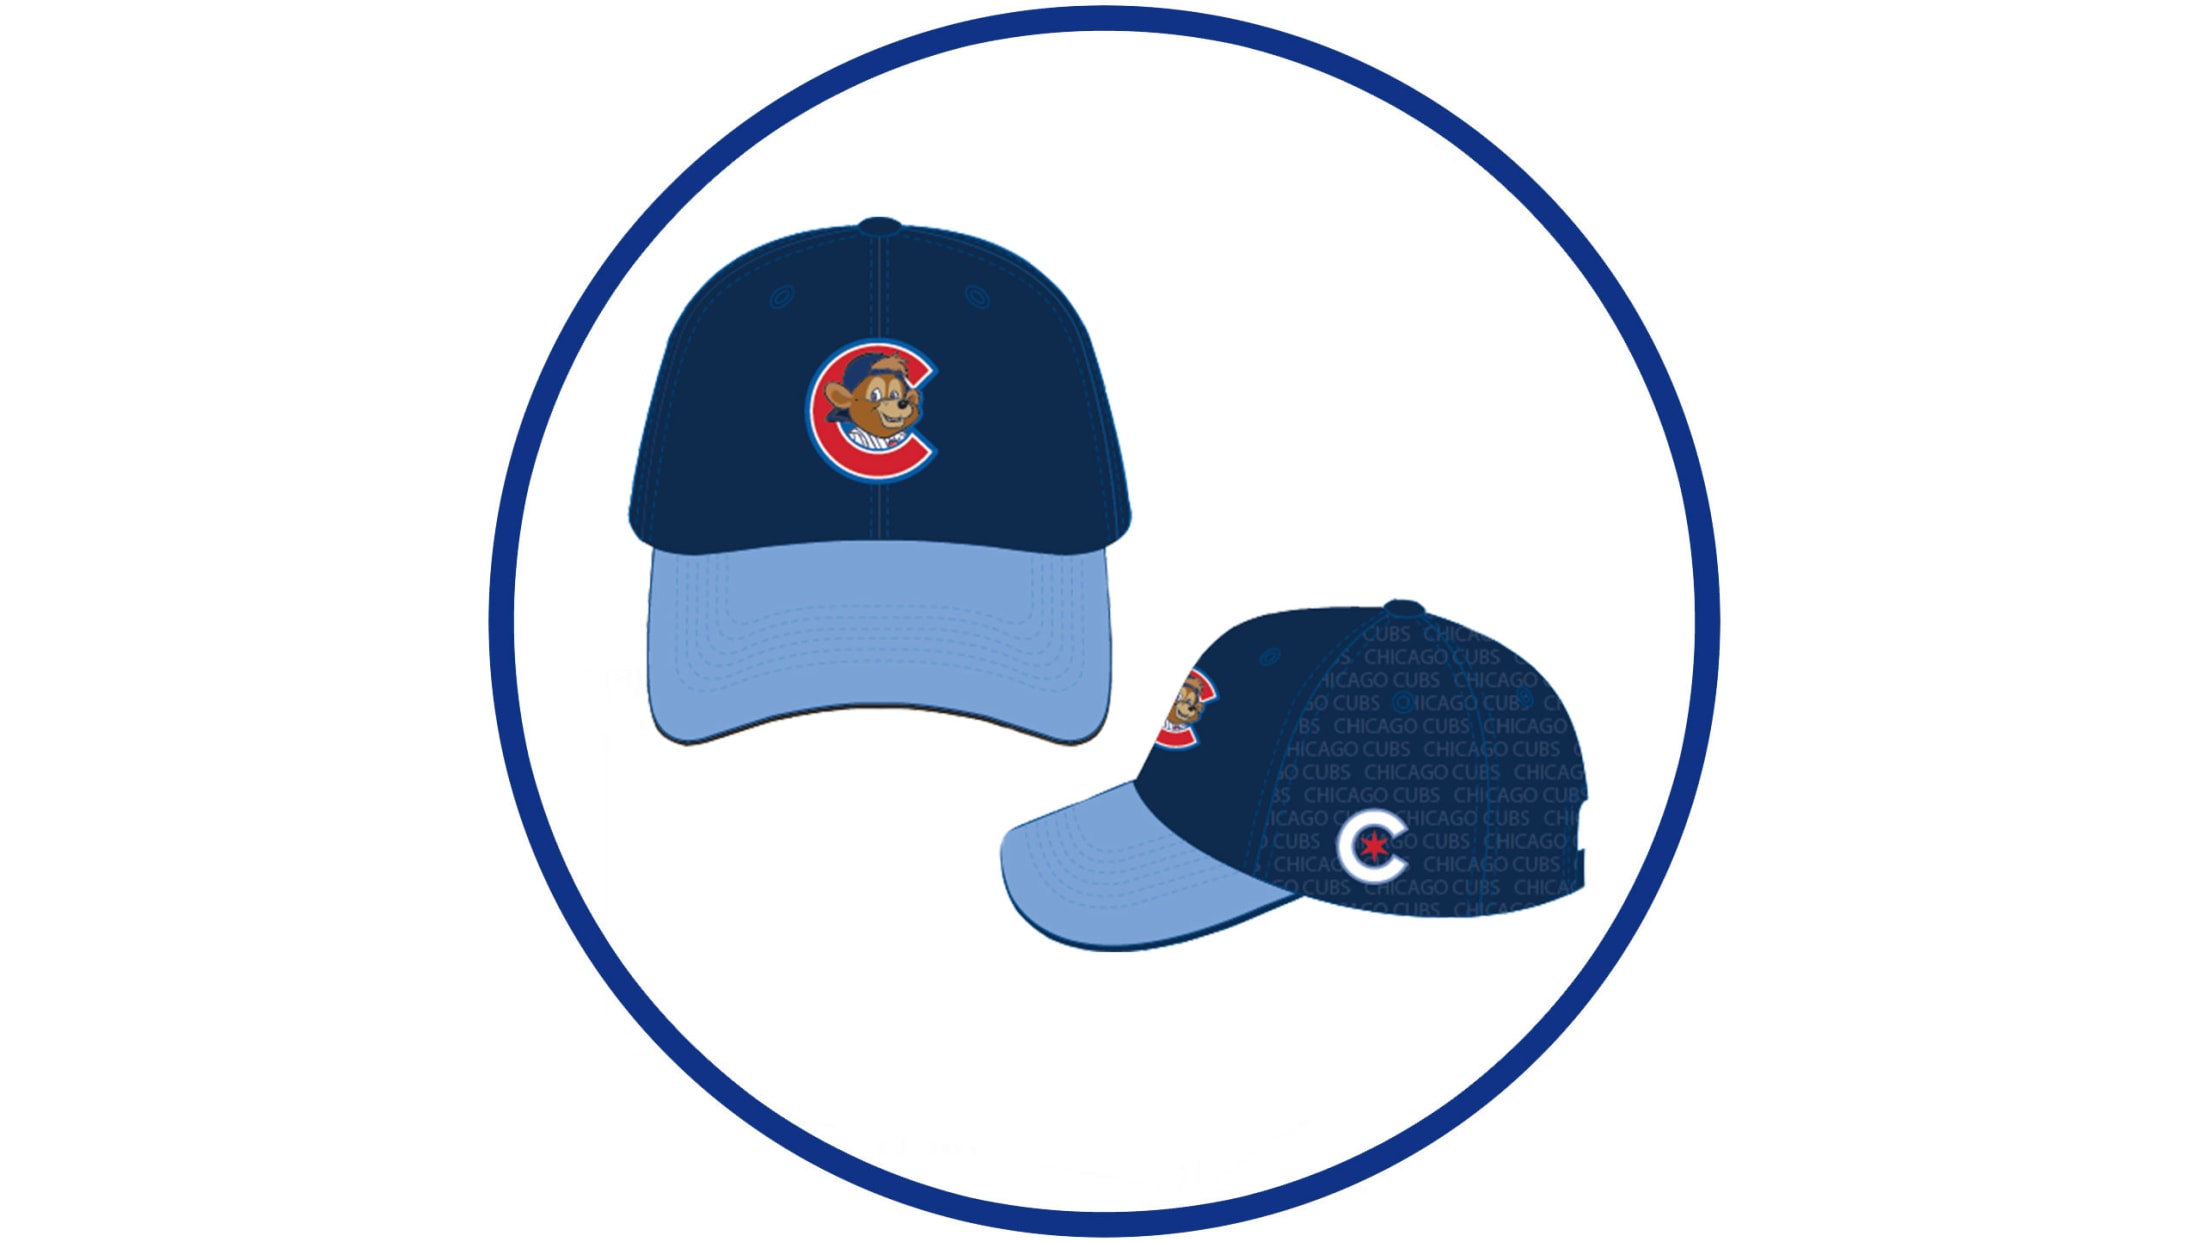 Chicago Cubs - #CubsCollection: Clark the Cub. Introduced in 2014